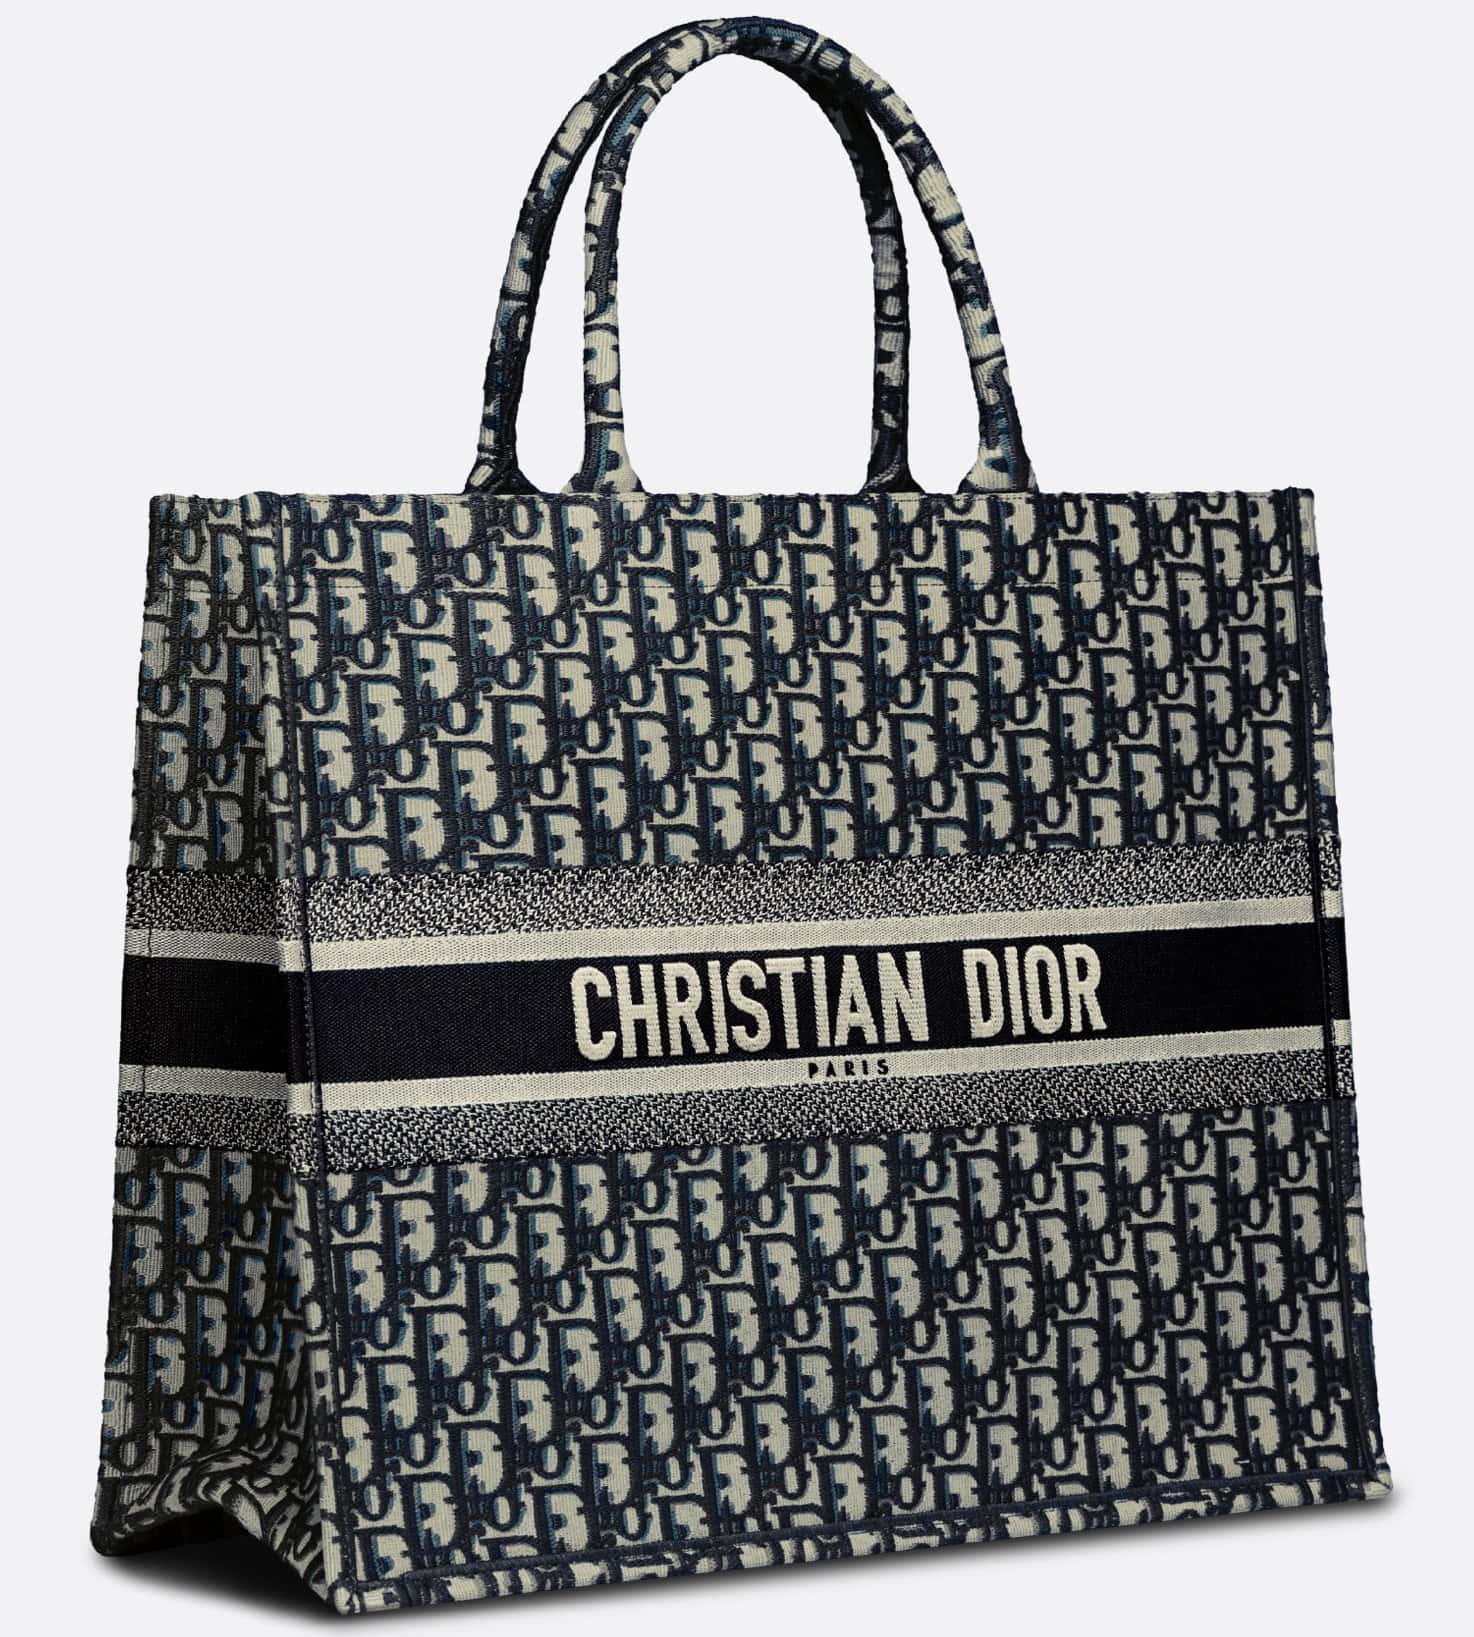 A staple of the Dior aesthetic, the Dior Book Tote is fully embroidered with a blue Dior Oblique motif